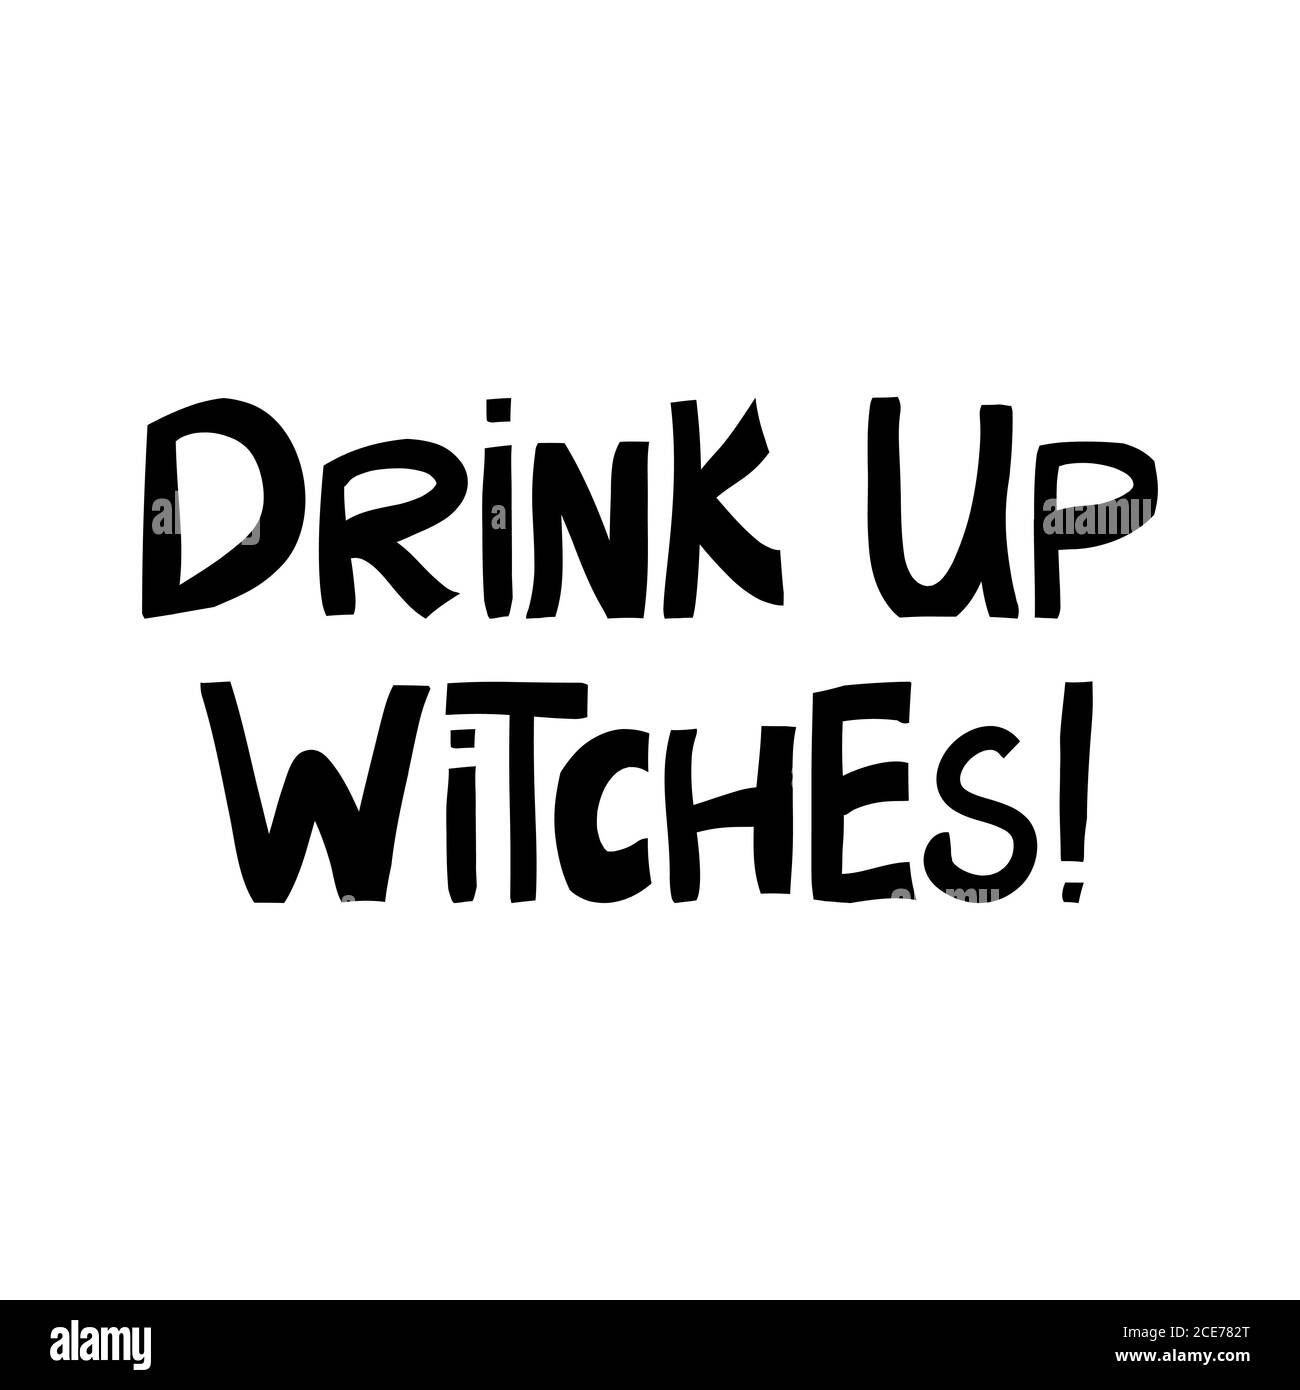 Drink up witches. Halloween quote. Cute hand drawn lettering in modern scandinavian style. Isolated on white background. Vector stock illustration. Stock Vector